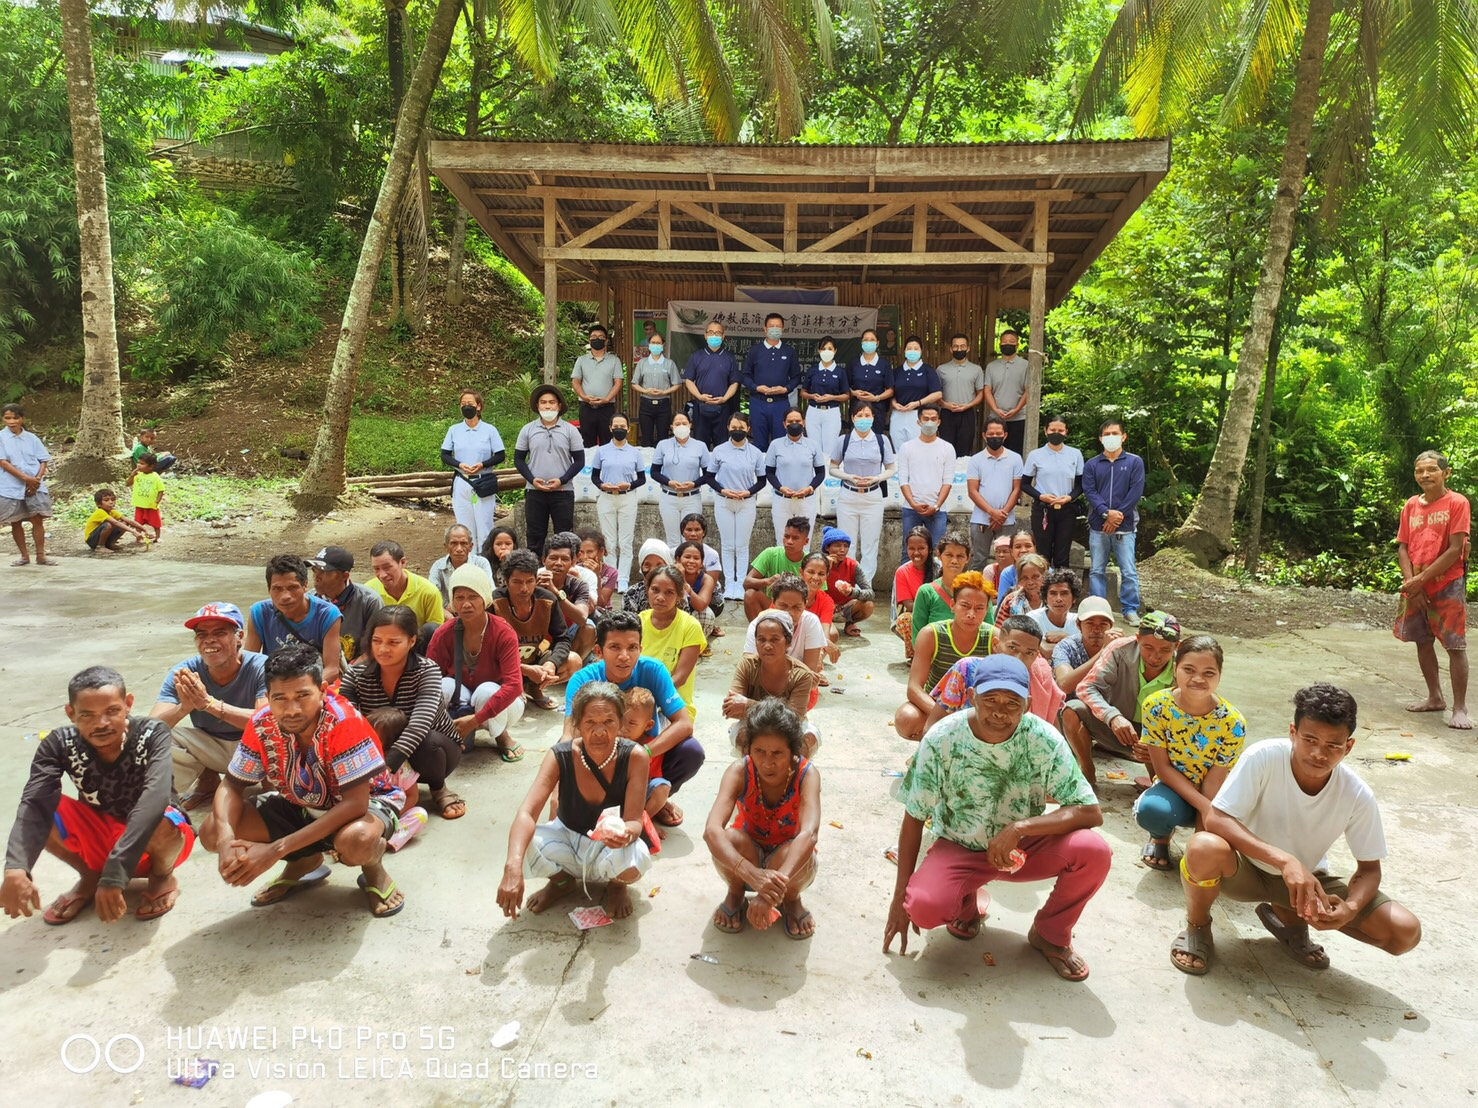 Tzu Chi volunteers (standing, back row) pose with members of the indigenous community during their farm visit and rice distribution in Talaingod, Davao del Norte on May 1, 2022.